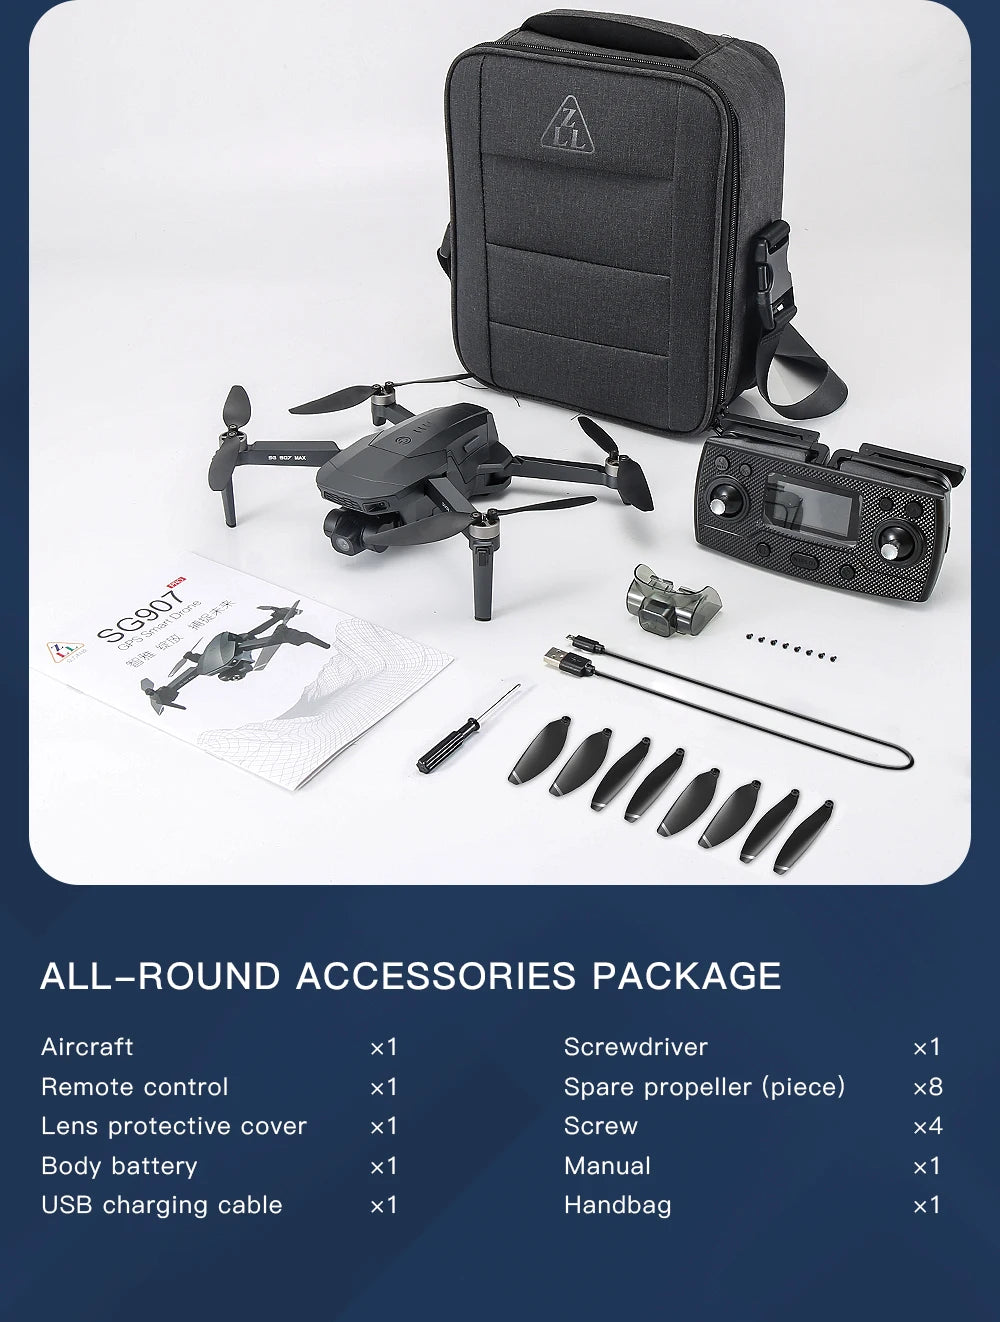 ZLL SG107 PRO Drone, accessories package aircraft x1 8g9077 nlun